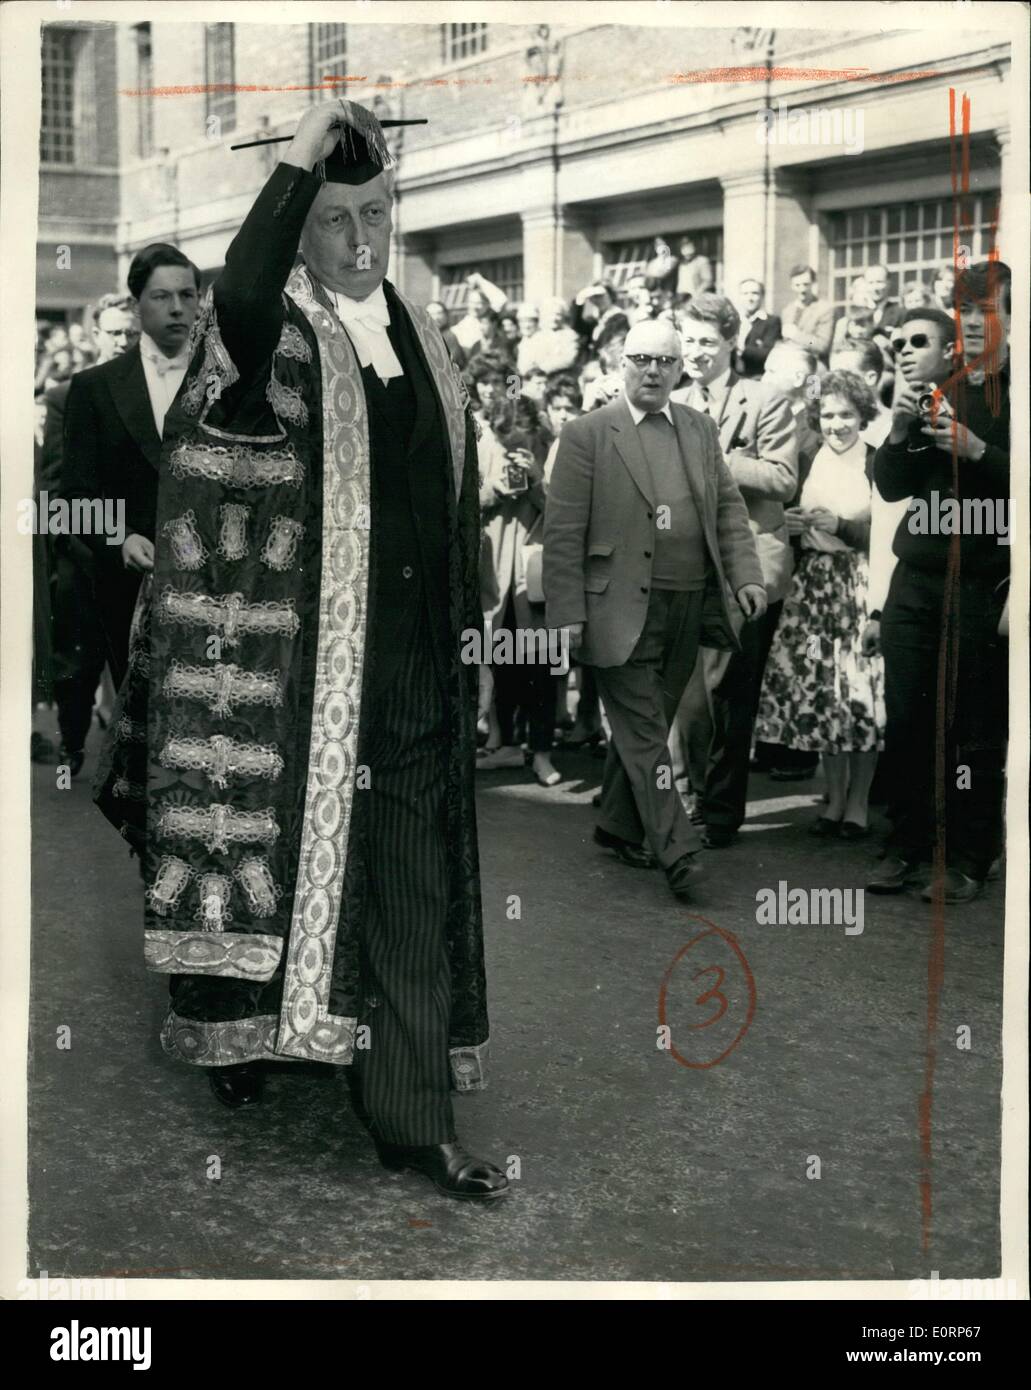 Apr. 04, 1960 - Prime Minister Installed as Chancellor of Oxford university.: The Prime Minister, mr. Harold Macmillan, was today installed as Chancellor of Oxford University, in a ceremony at the Sheldonian Theatre. Photo shows Mr. harold Macmillan, waering his robes - pistured at Oxford University today, where he was installed as Chancellor. Hs page is his 16-year old grandson, Alexander Macmillan, an Eton Schoolboy. Stock Photo